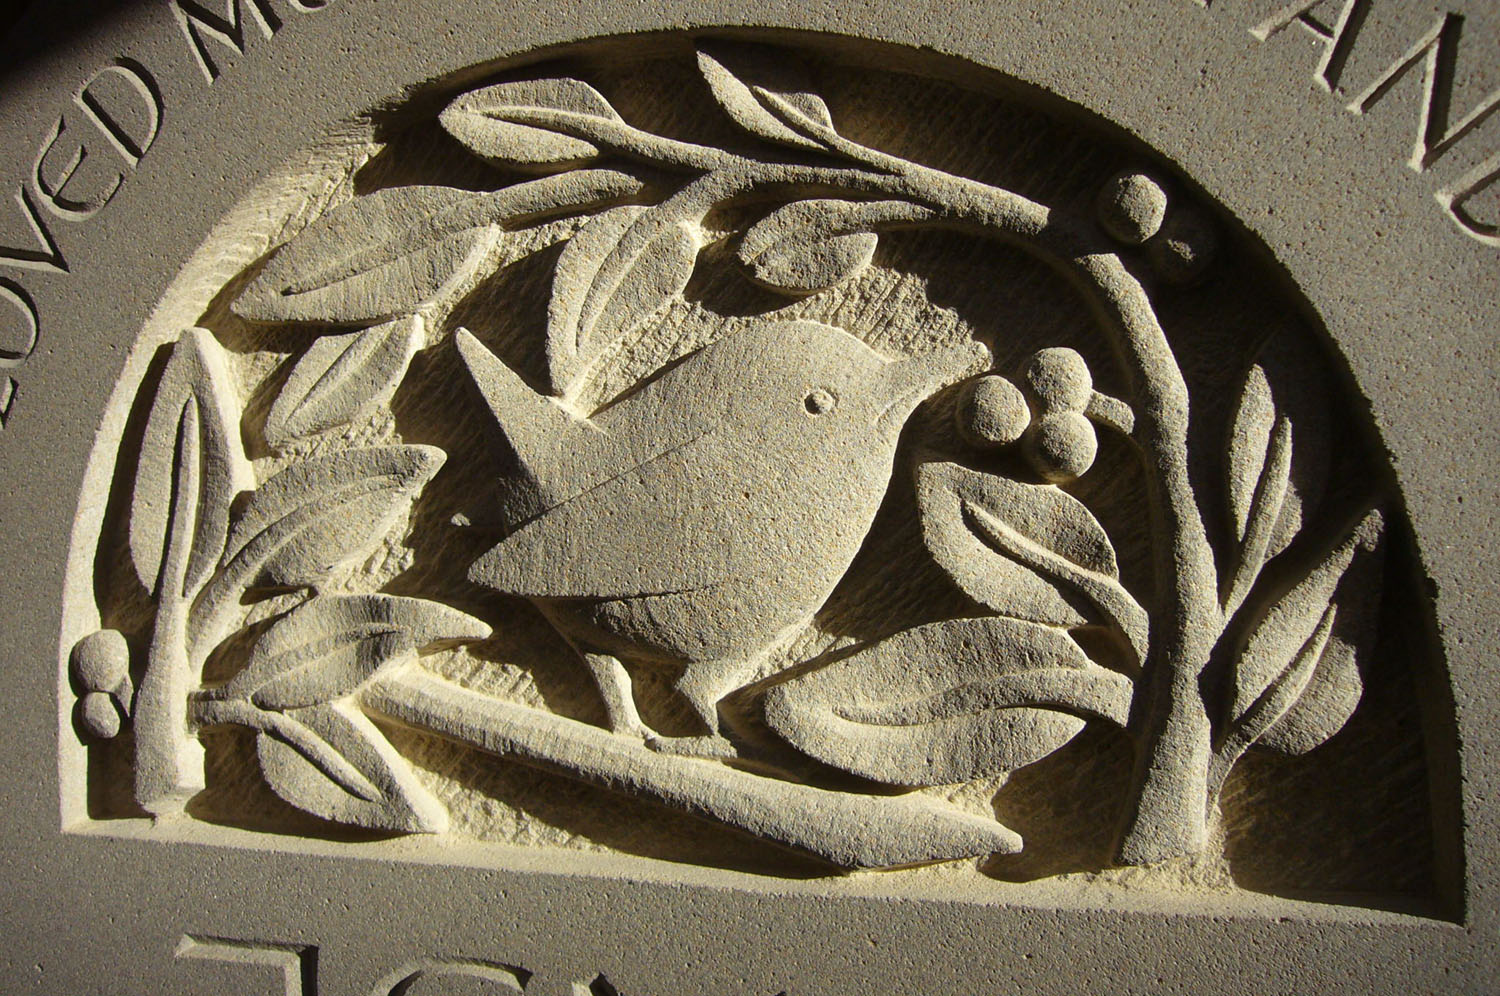 Forest of Dean sandstone carving of a wren